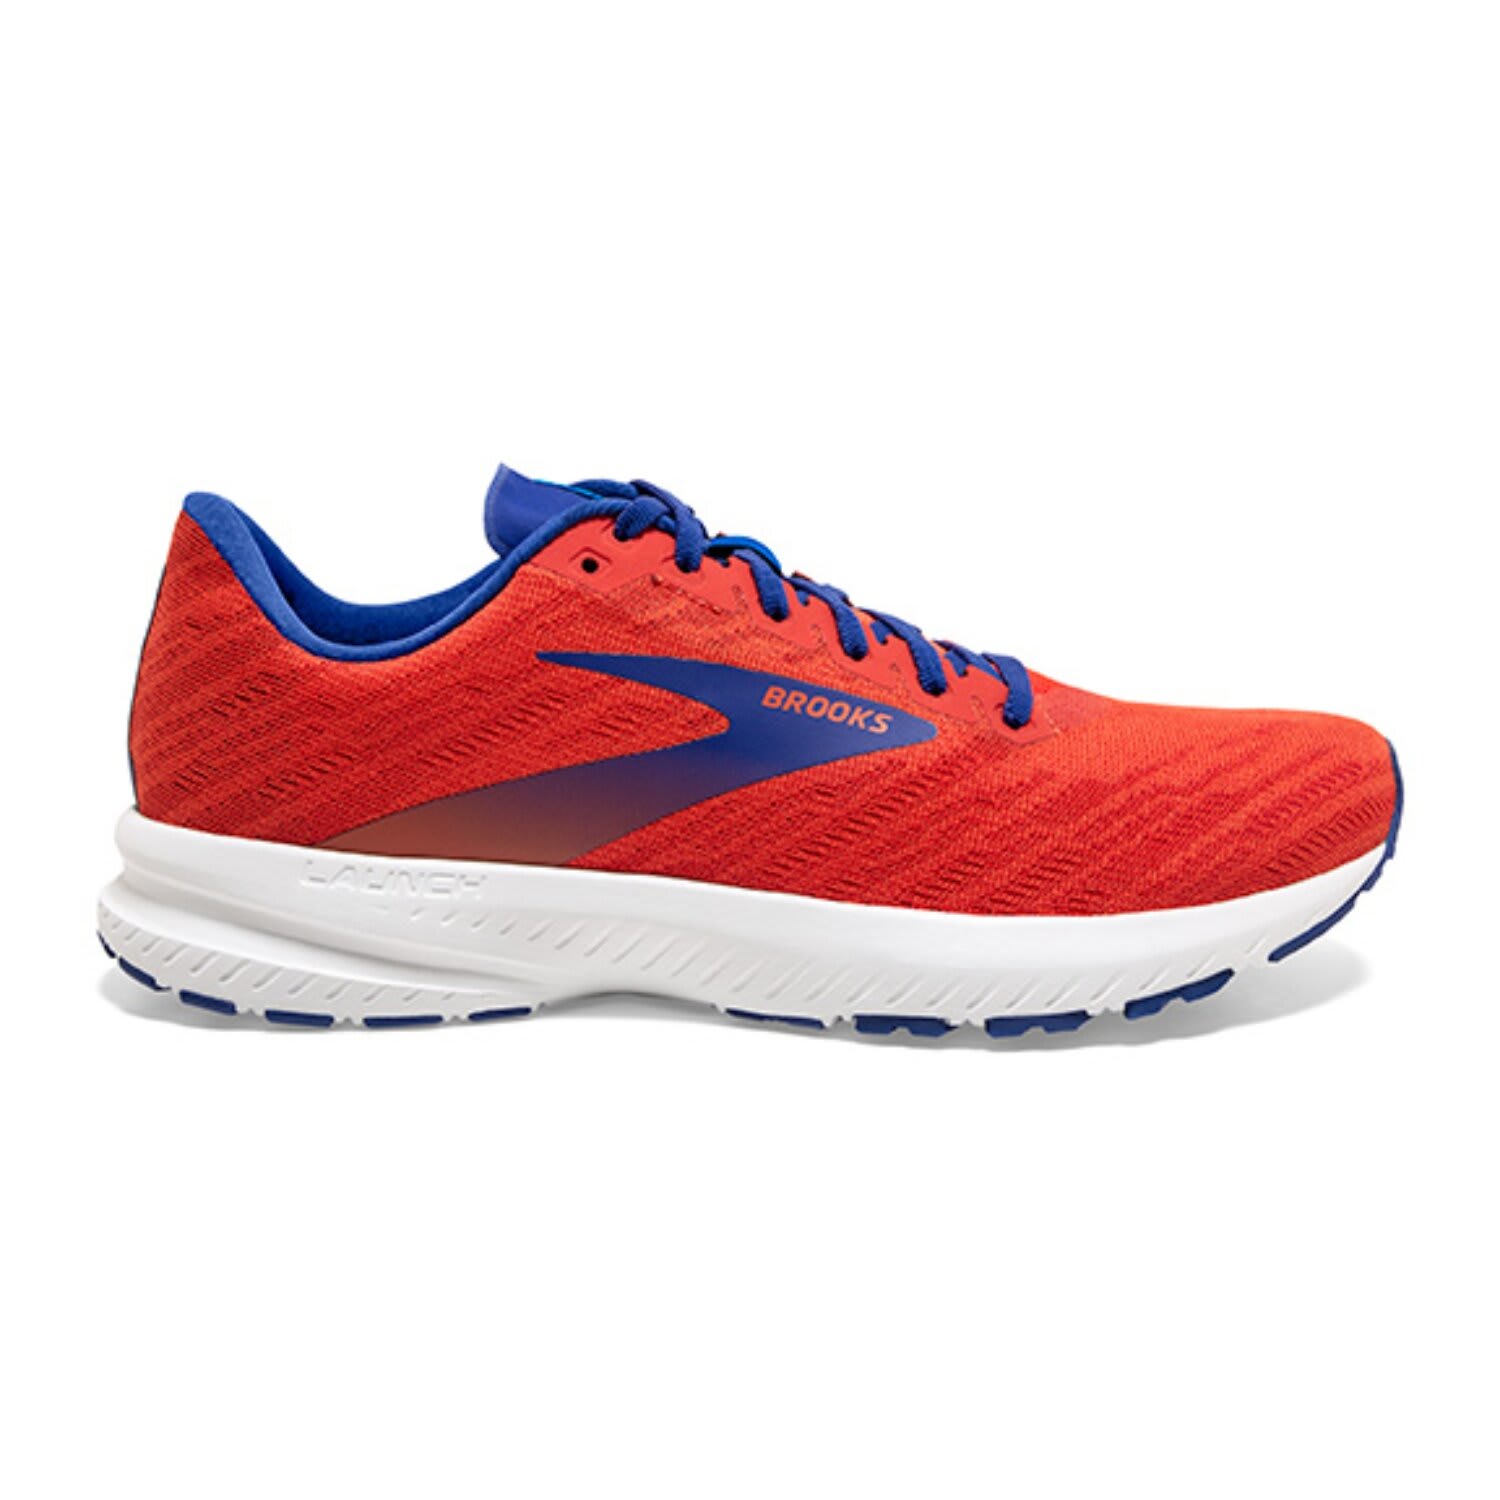 Road Running Shoes | Sportsmans Warehouse